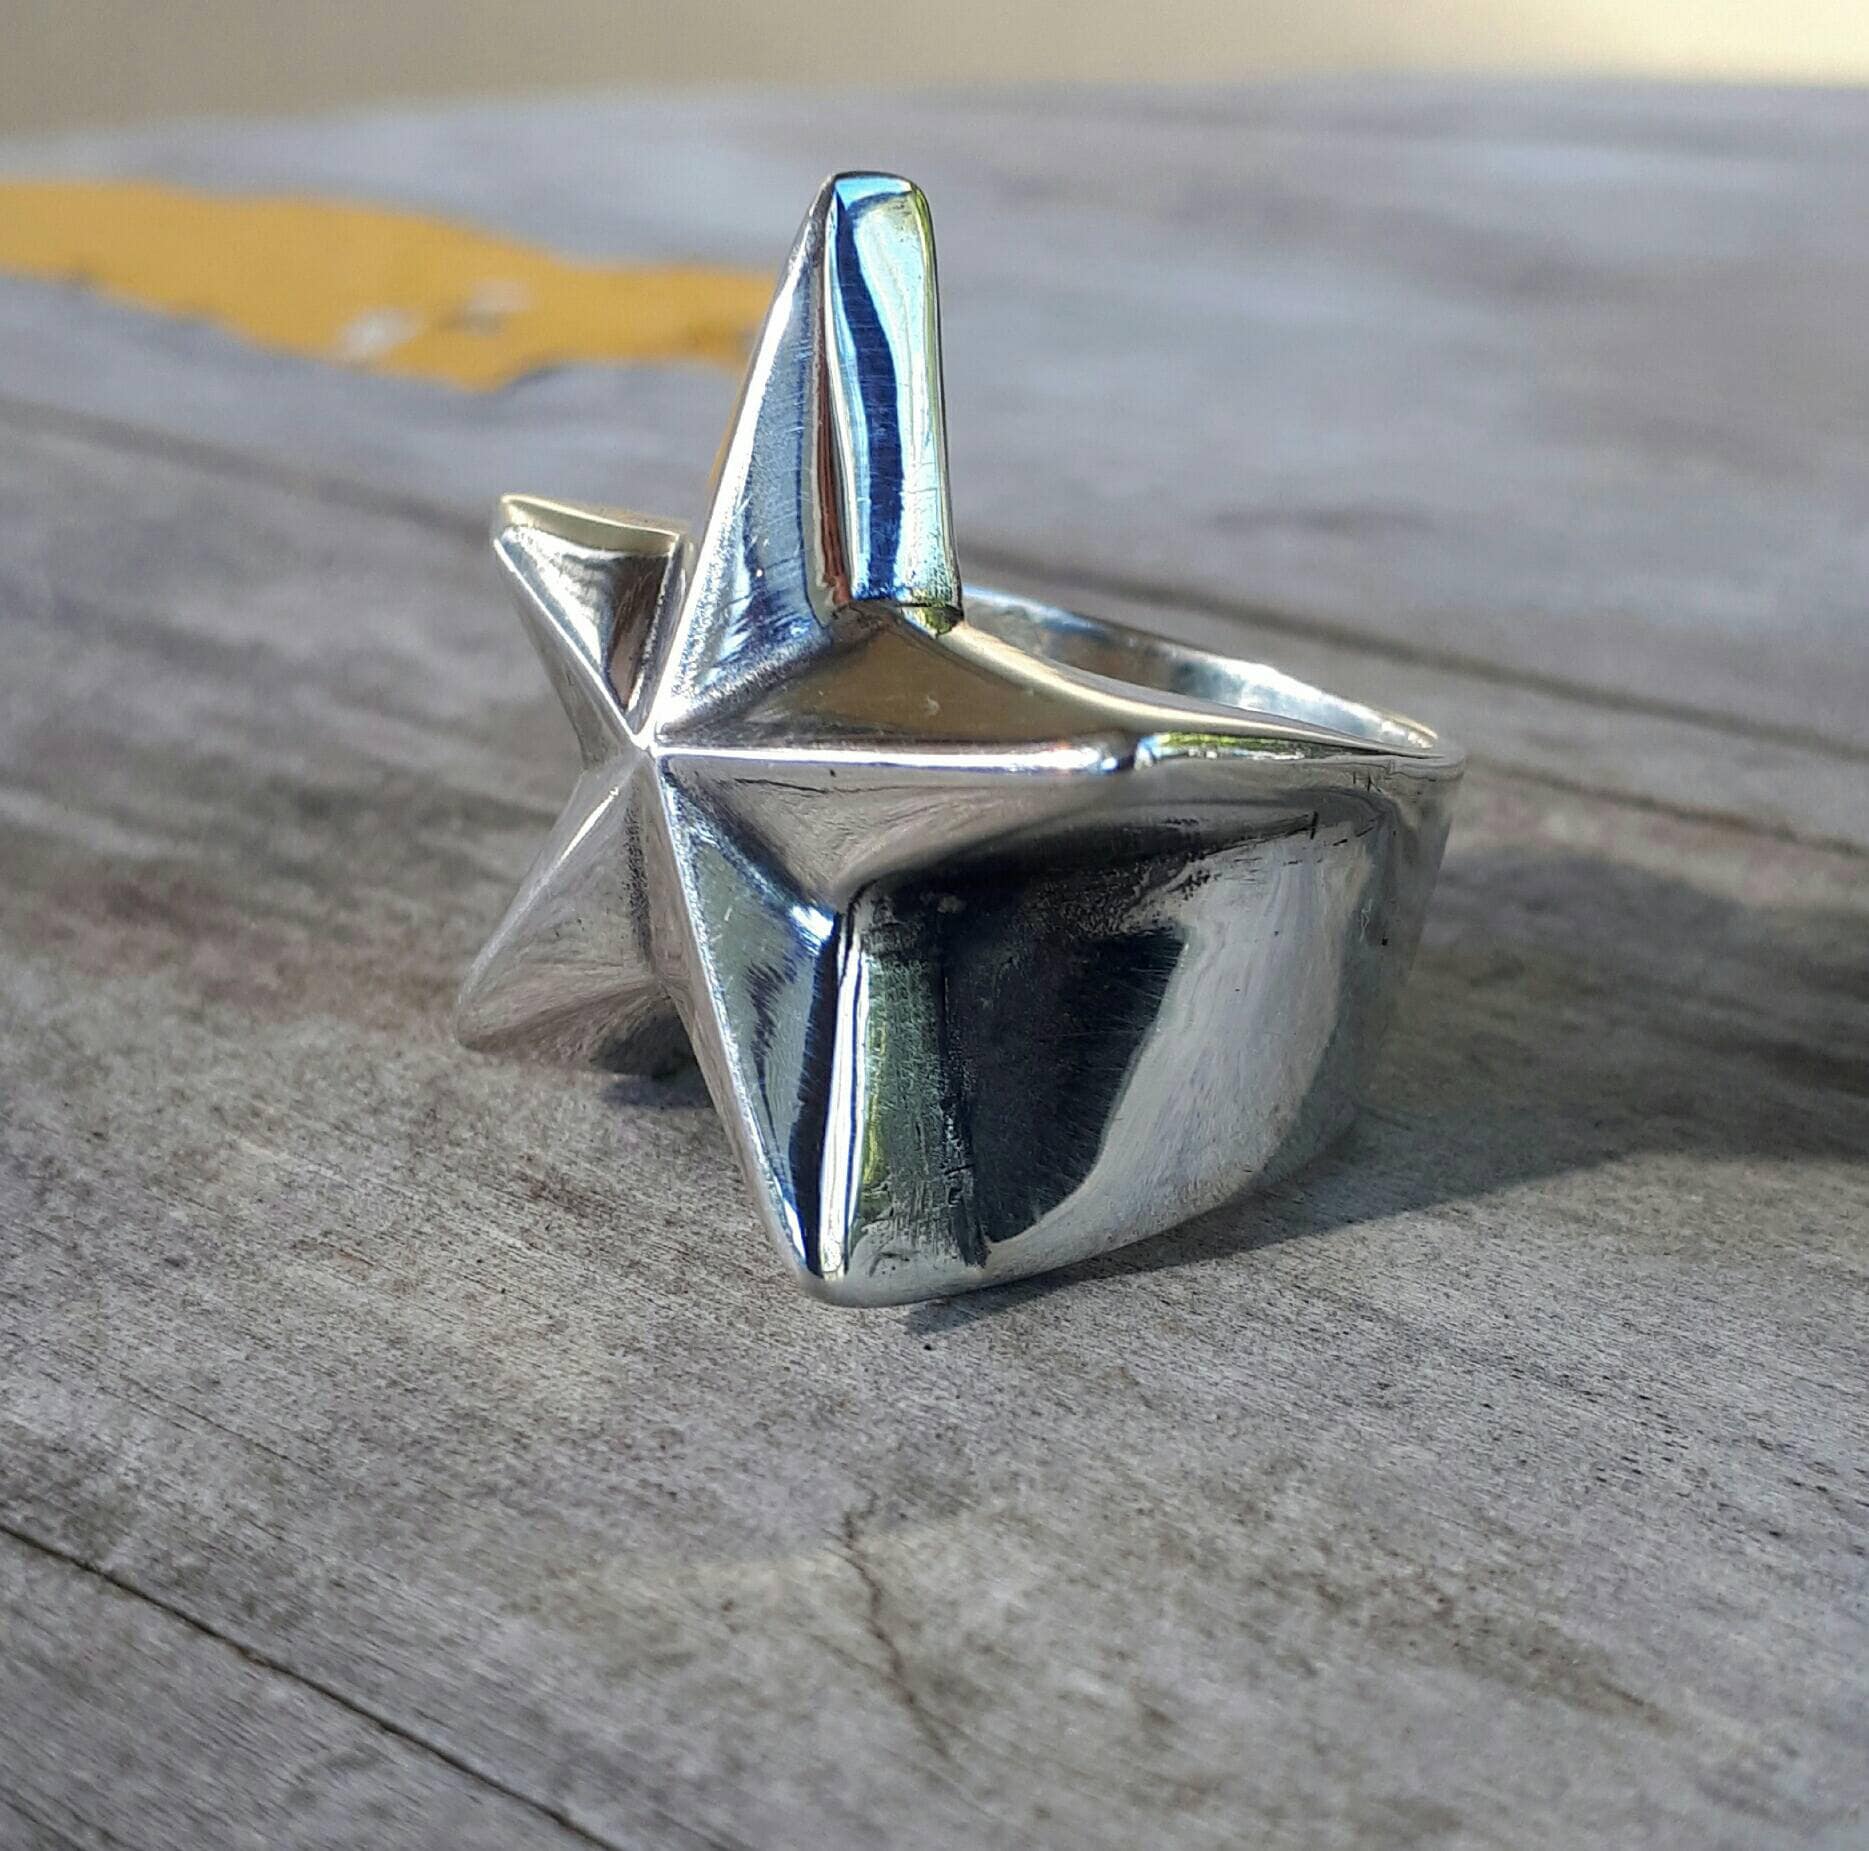 Large Star Ringsterling Silvercaltex Starfive Pointed - Etsy